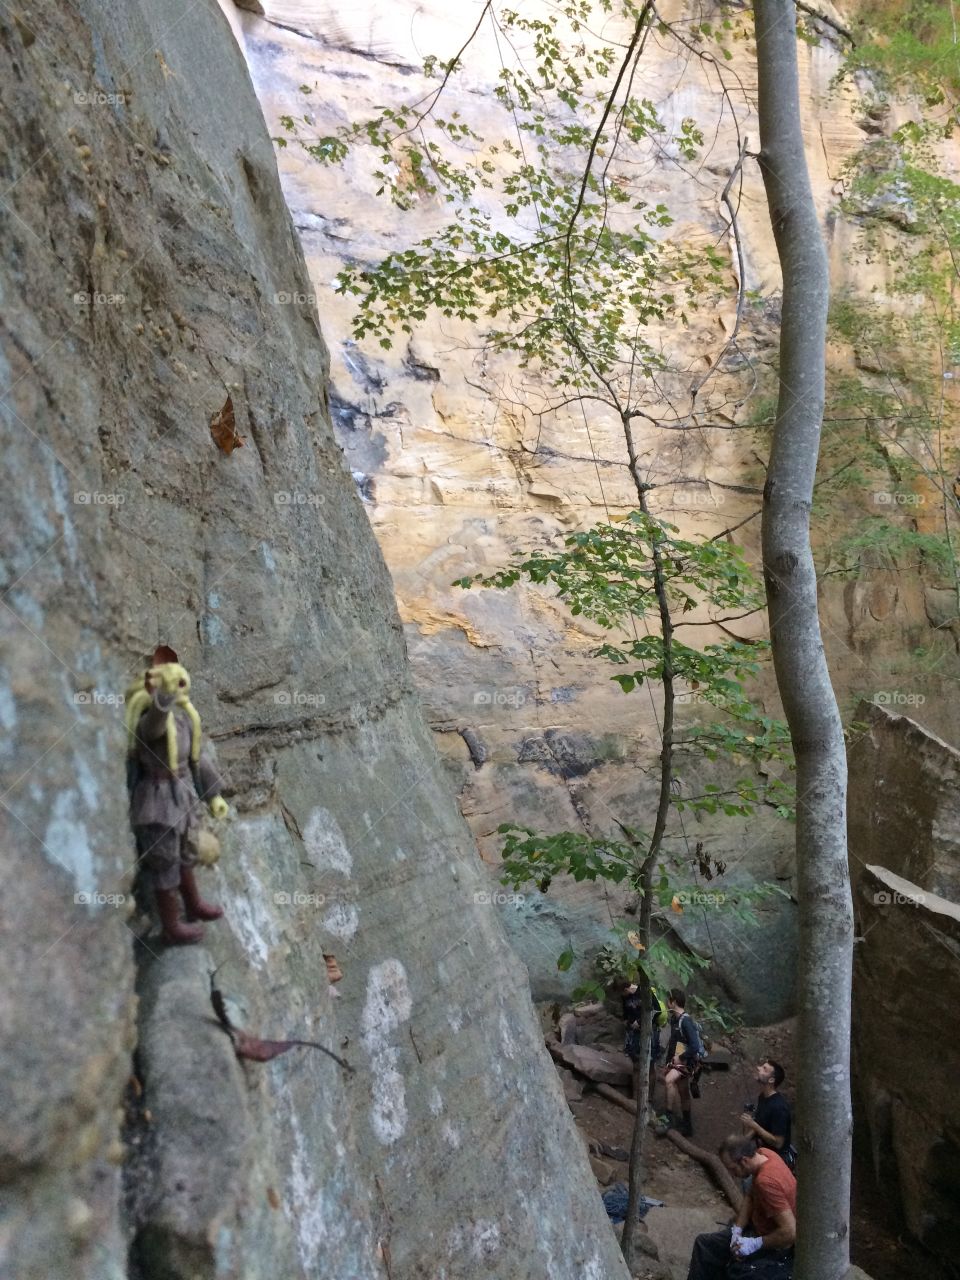 At the Red River Gorge